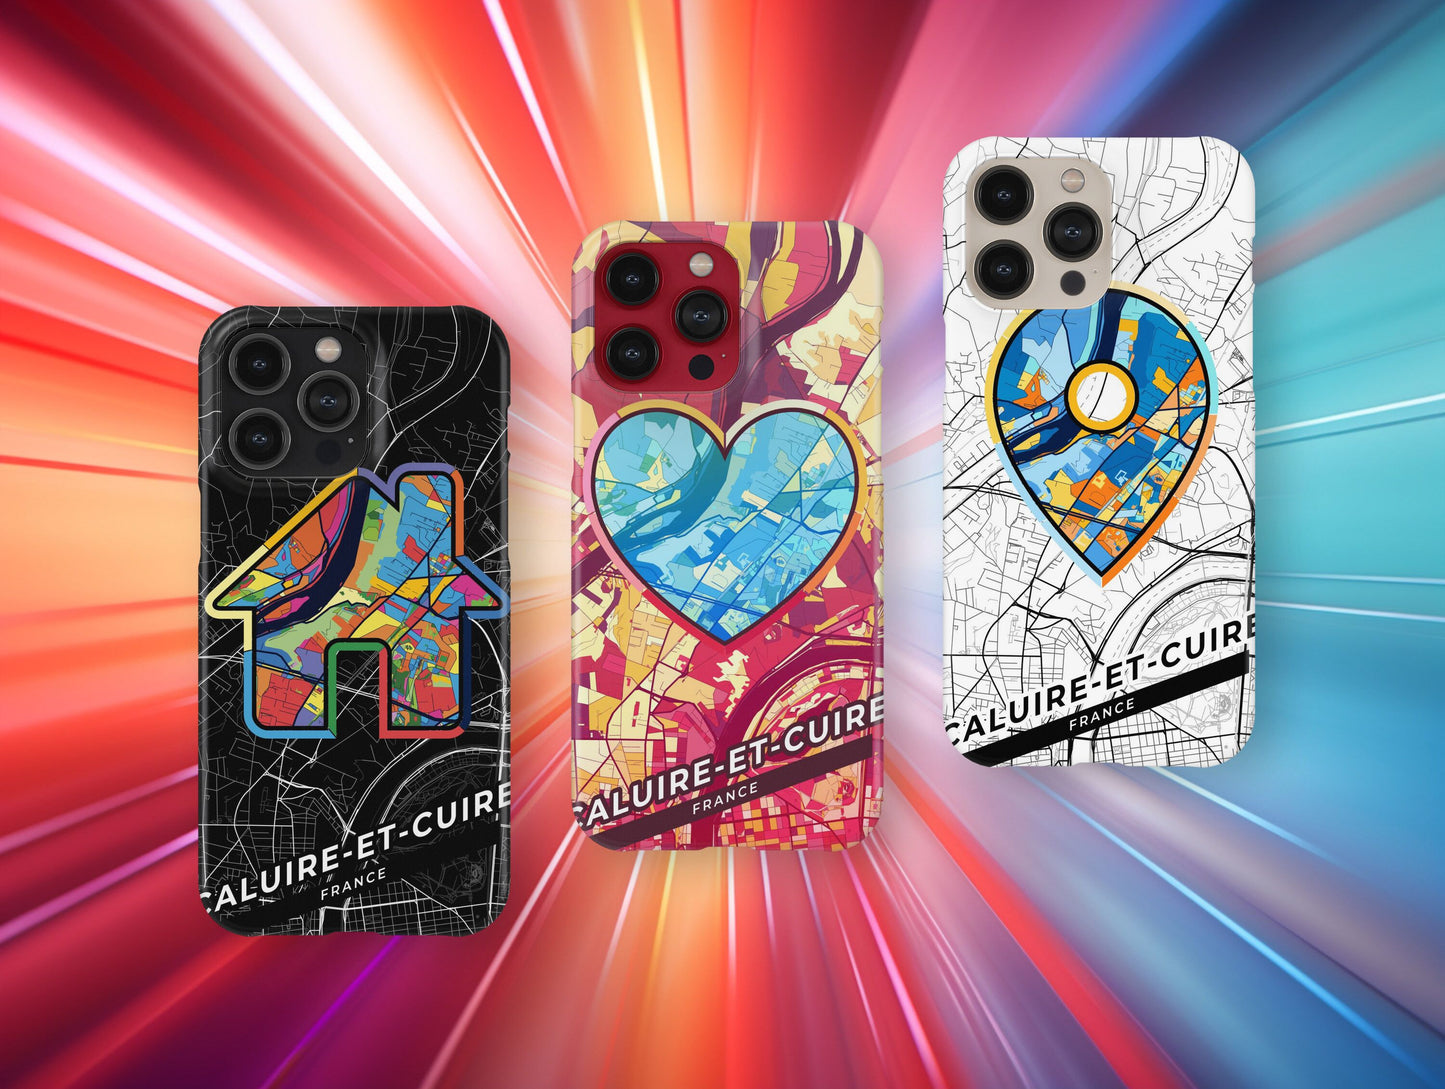 Caluire-Et-Cuire France slim phone case with colorful icon. Birthday, wedding or housewarming gift. Couple match cases.